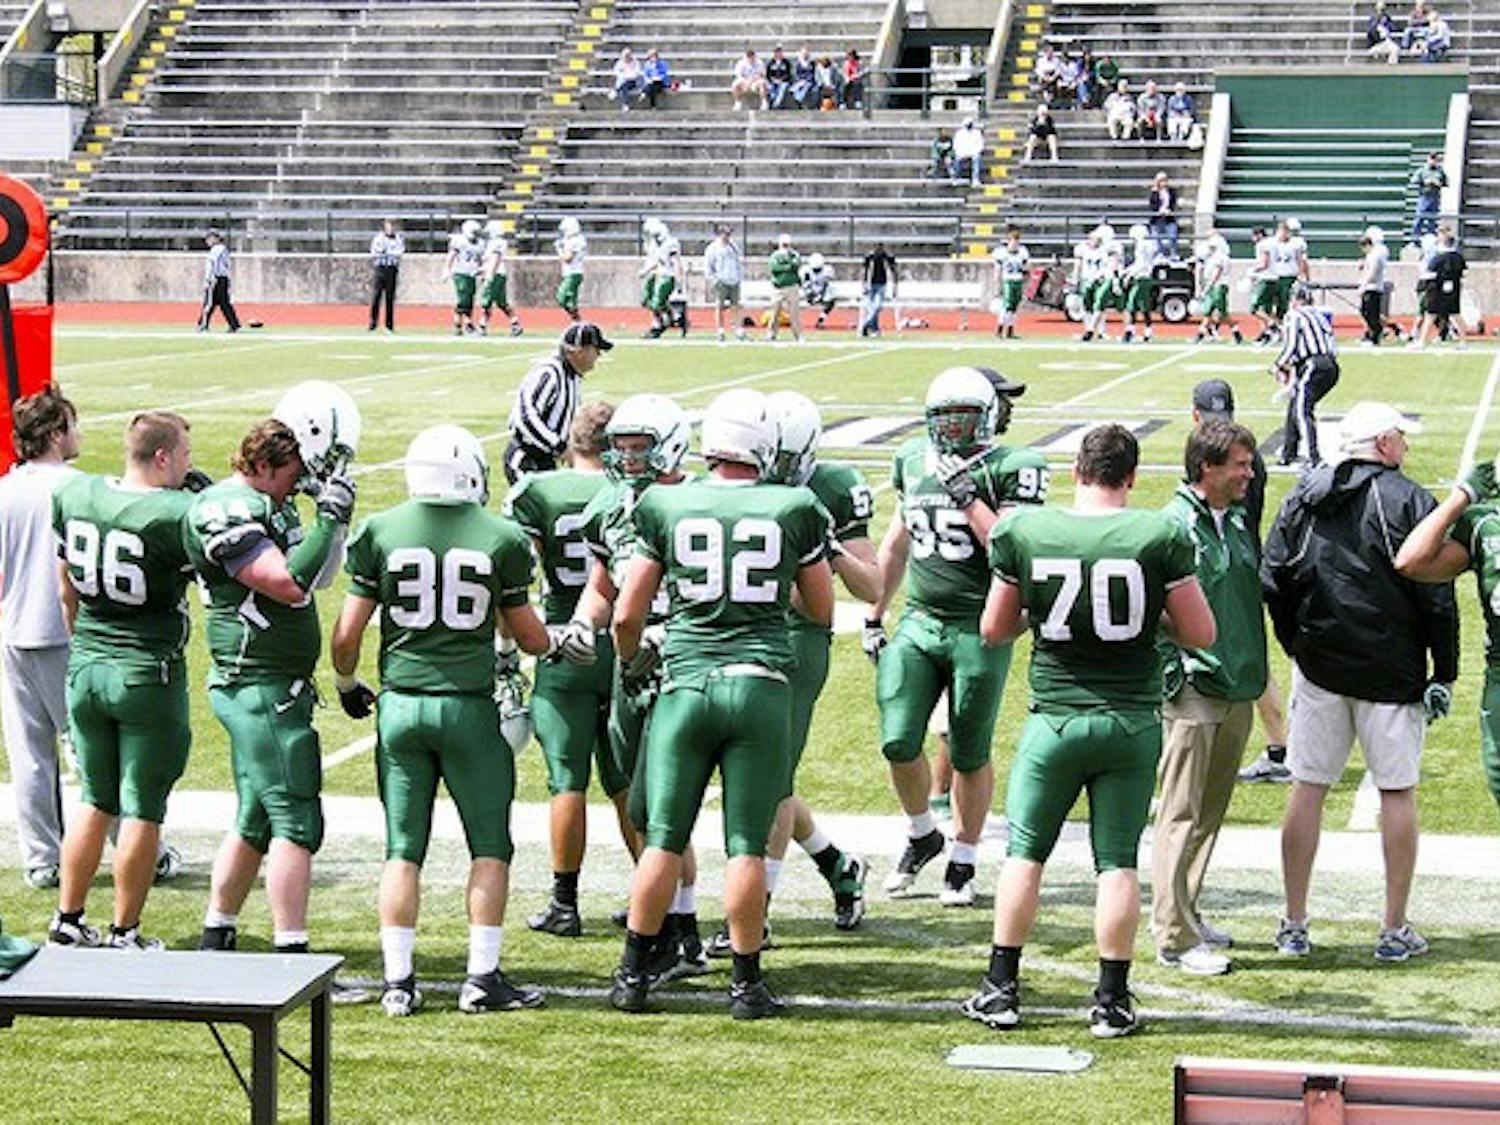 The Green and White Game was played without tackling to avoid injuries and to increase the number of snaps.